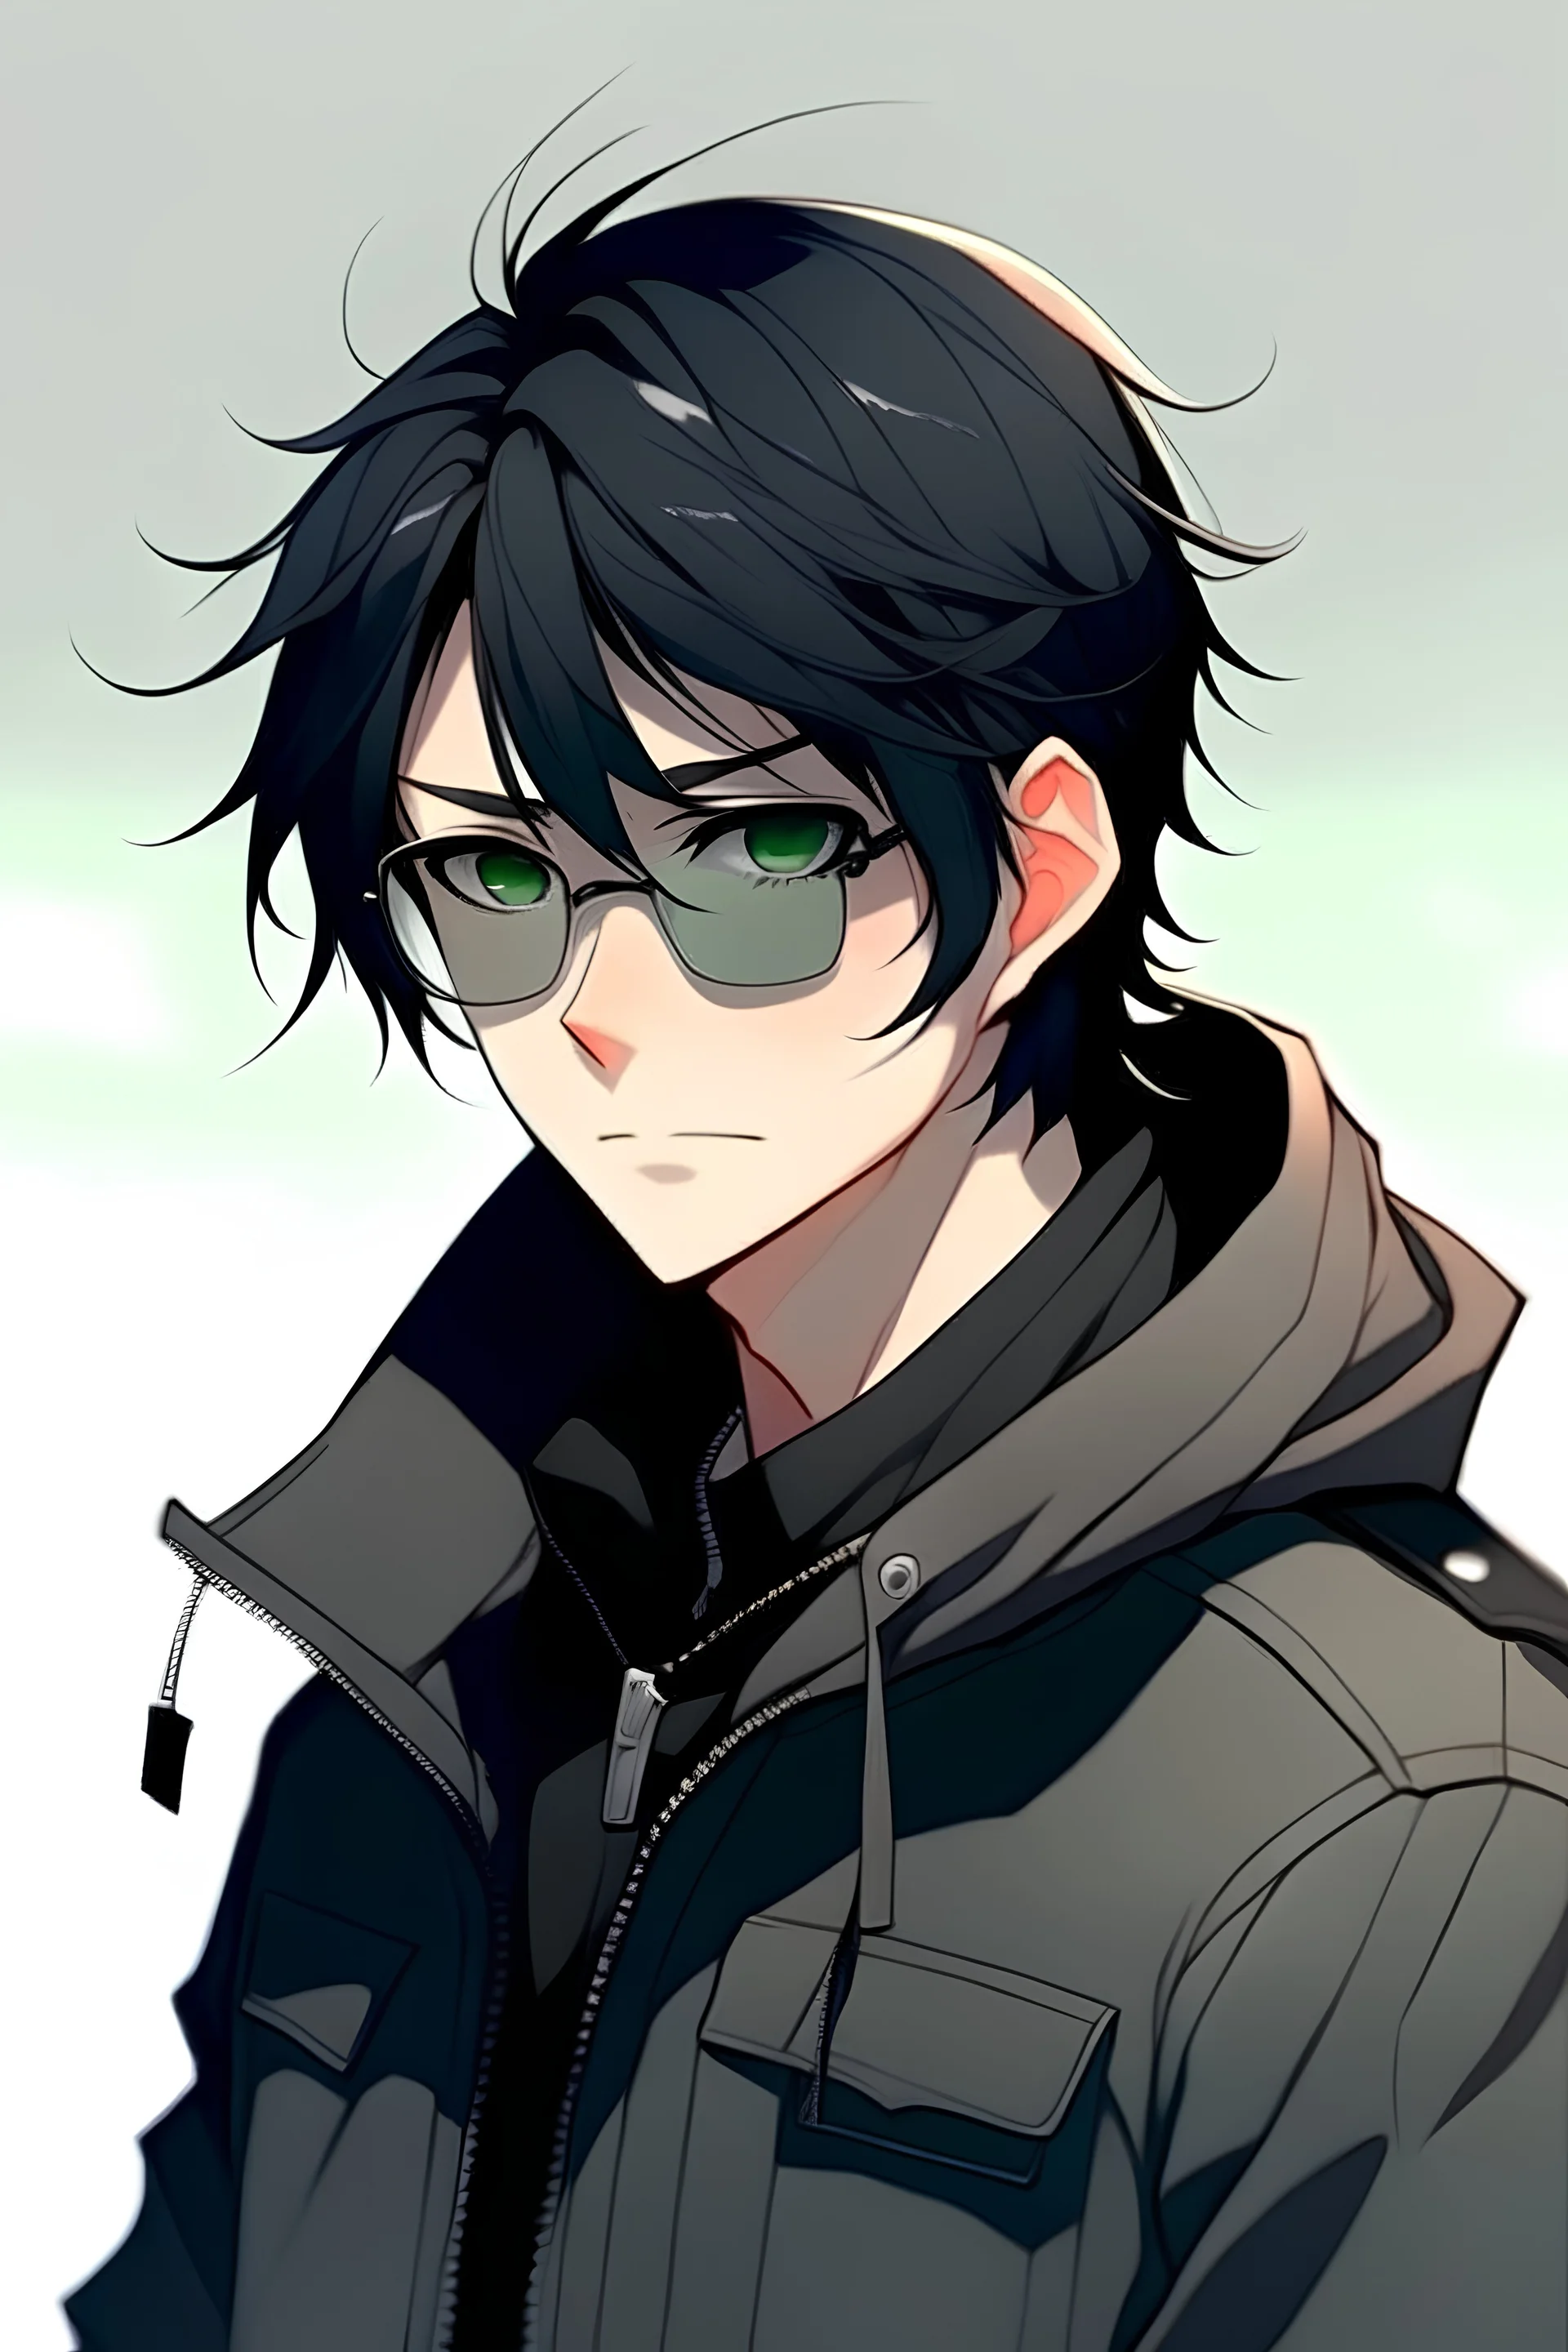 An anime boy with black hair, wearing a black jacket and sunglasses